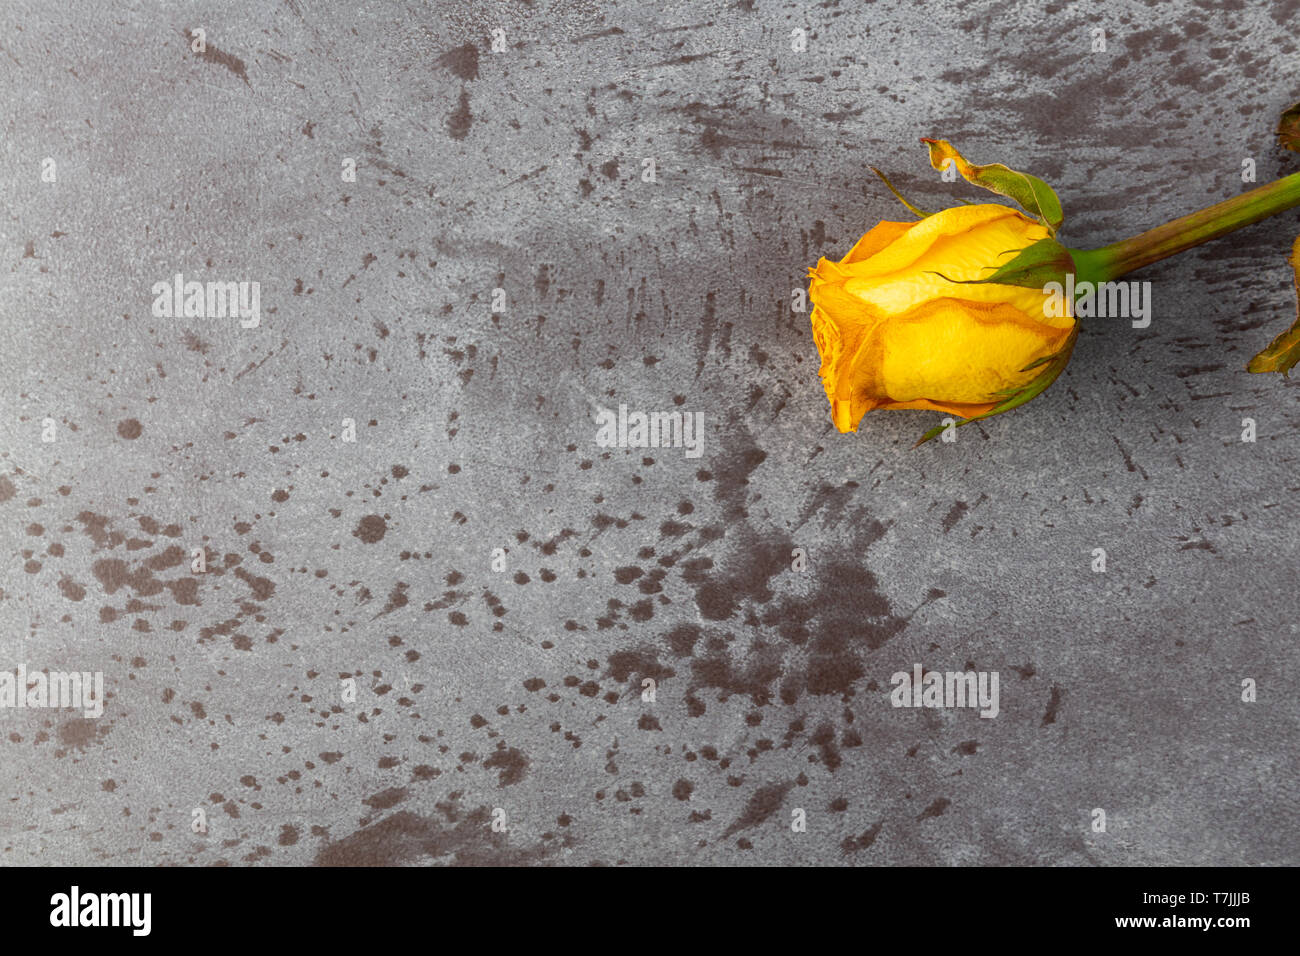 Overhead view of a single wilting yellow rose on a gray mottled background illuminated with natural lighting. Stock Photo